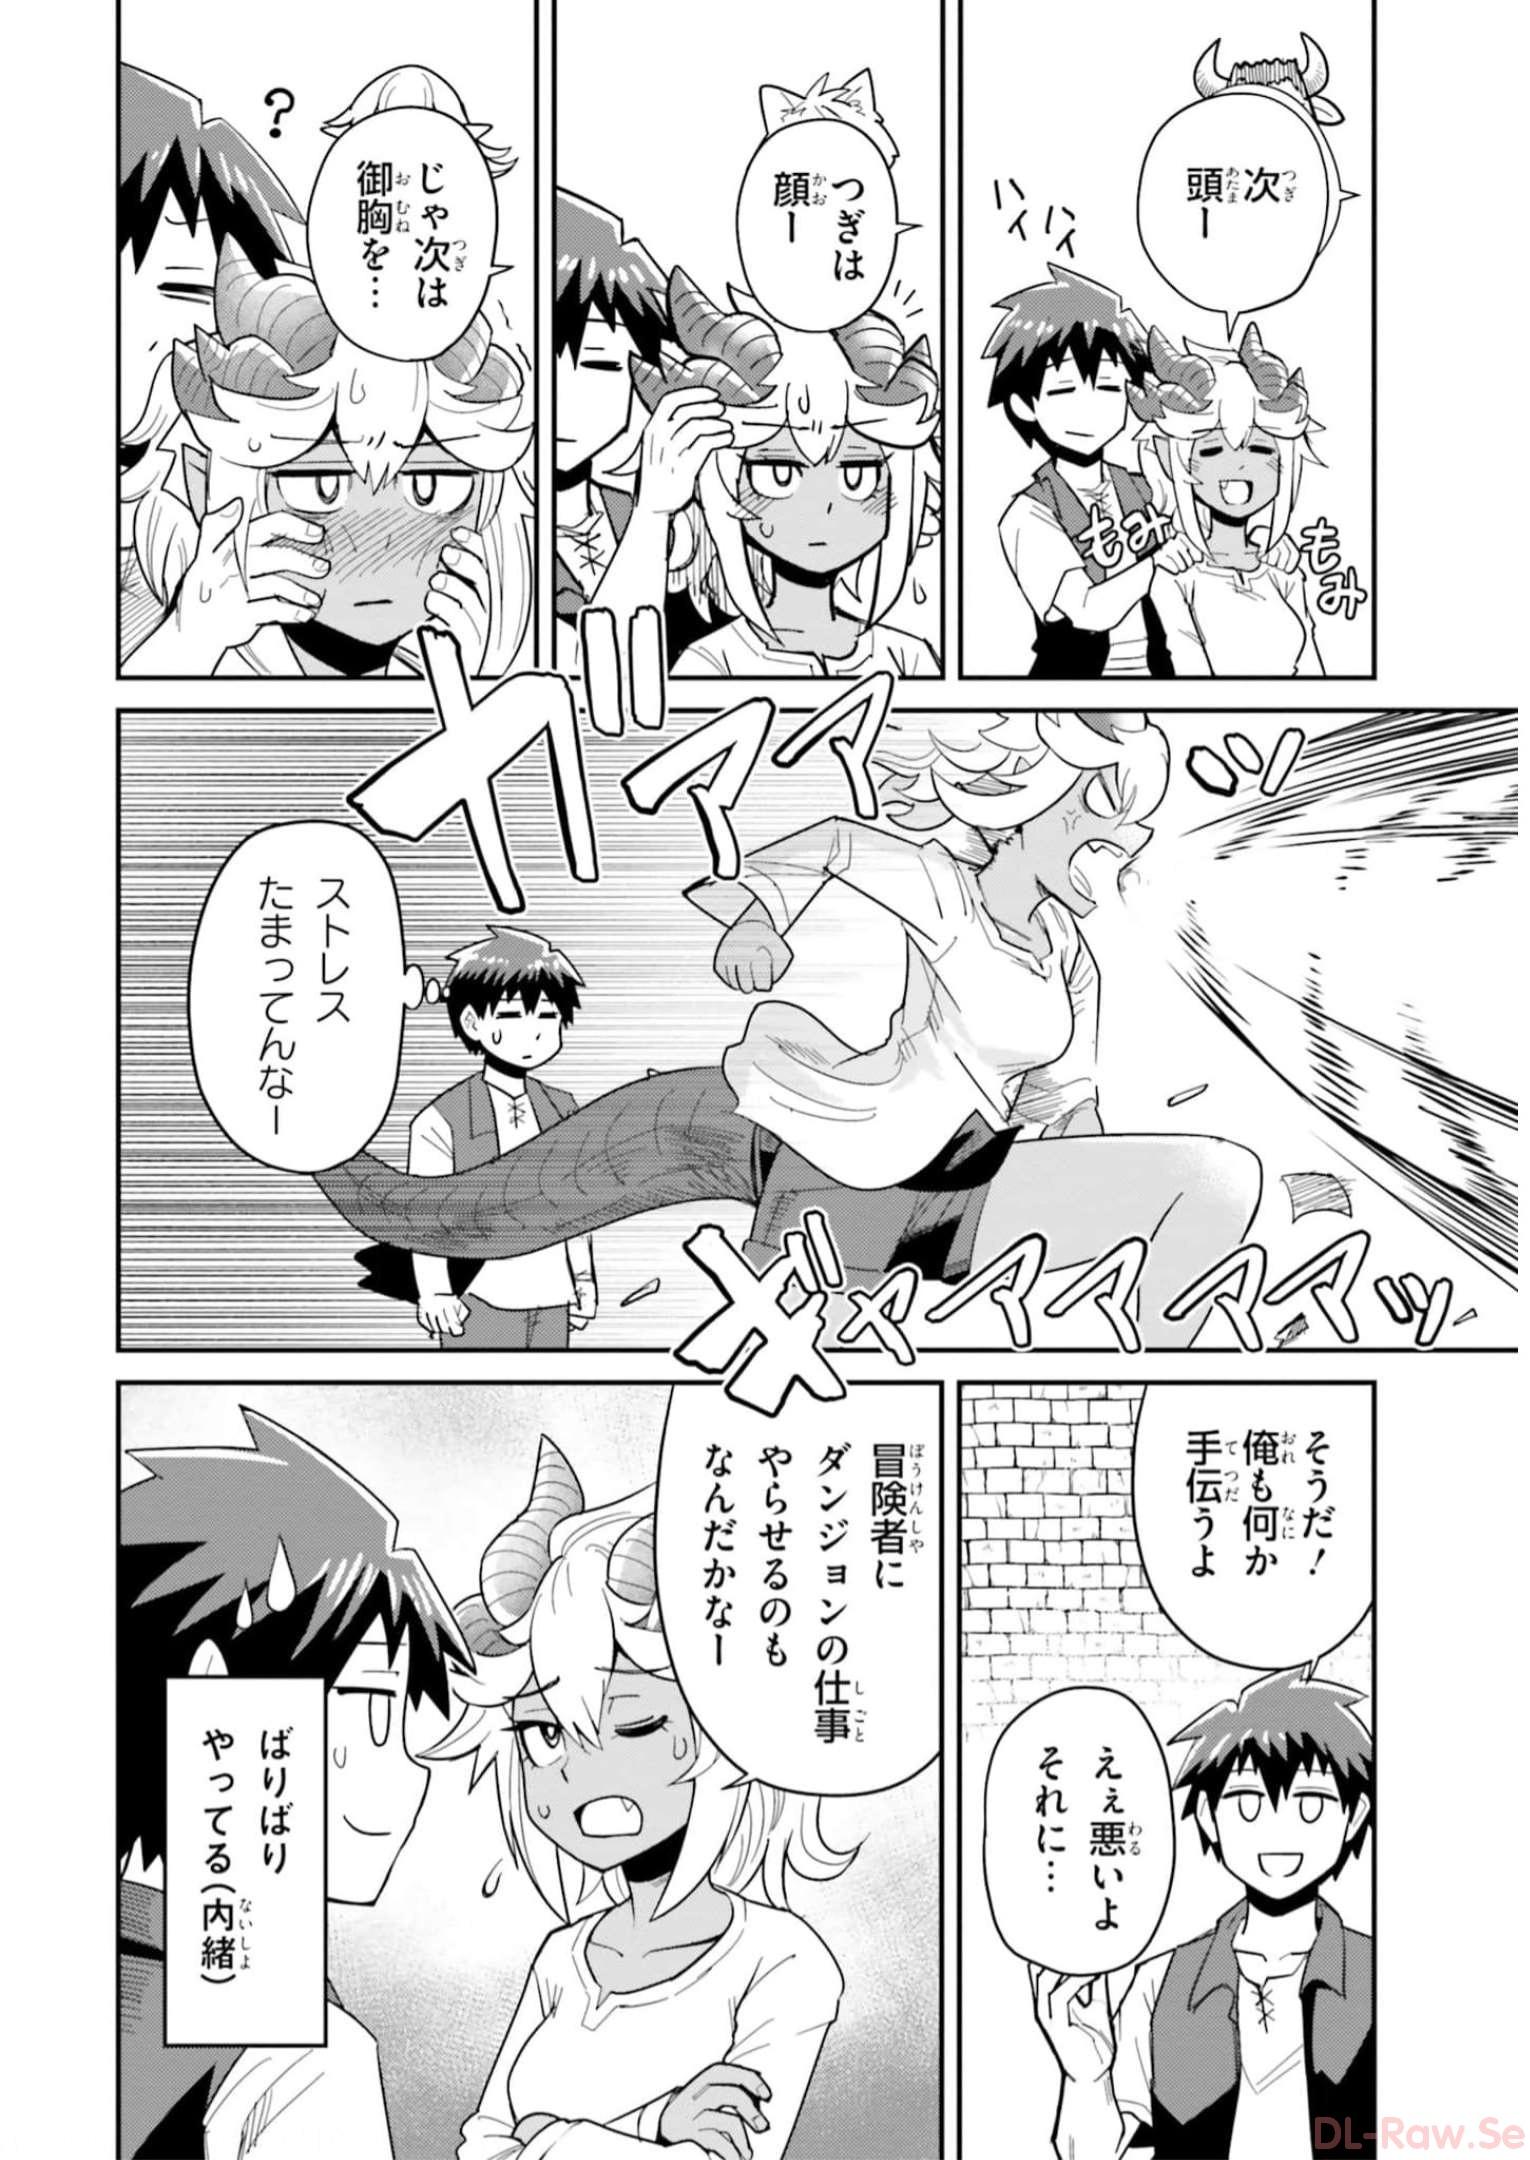 Dungeon Friends Forever Dungeon's Childhood Friend ダンジョンの幼なじみ 第23話 - Page 6